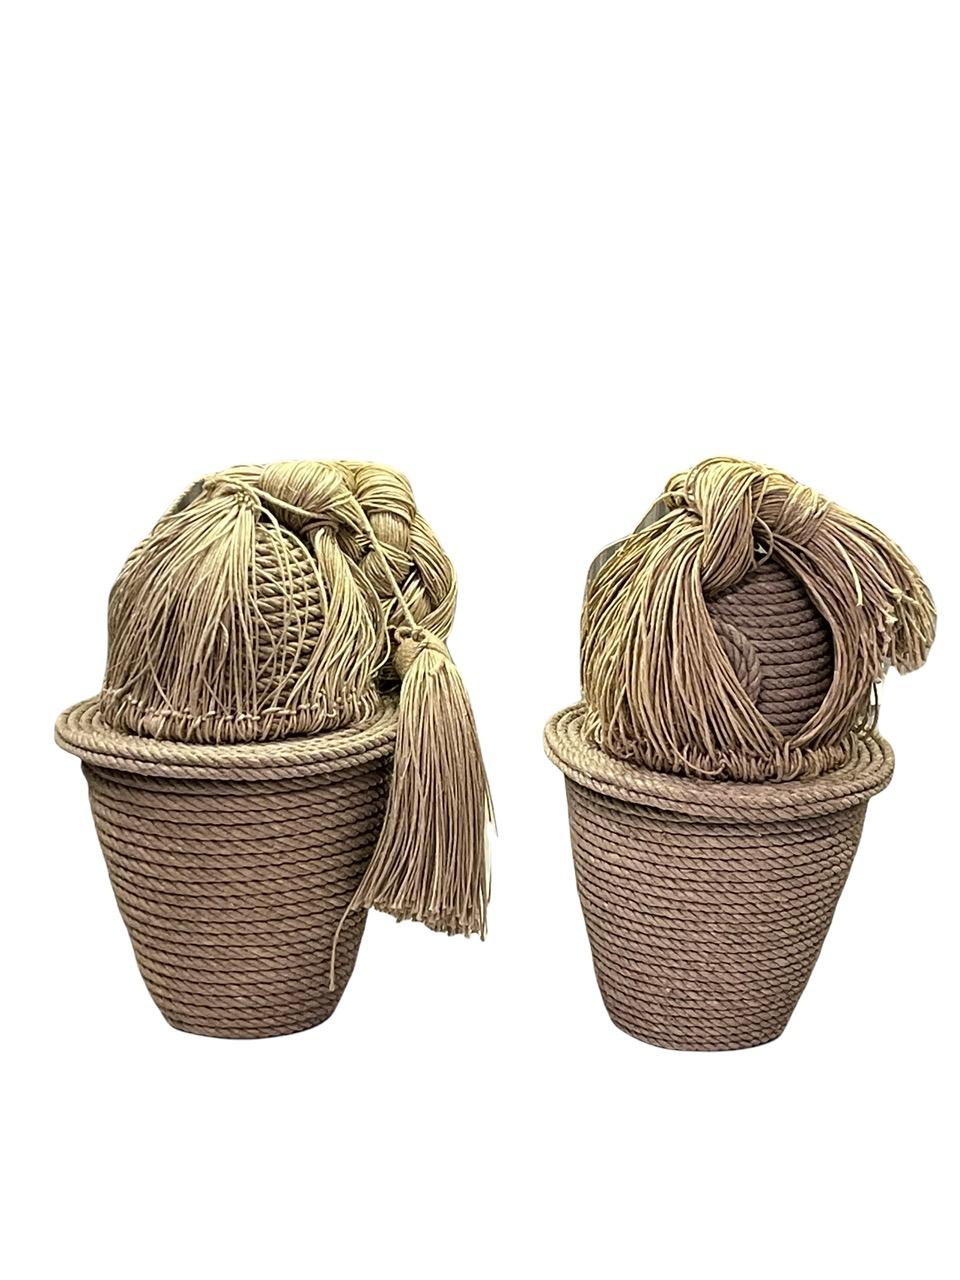 Pair of Contemporary 21st Century French Christian Astuguevieille Jute Rope Co For Sale 2